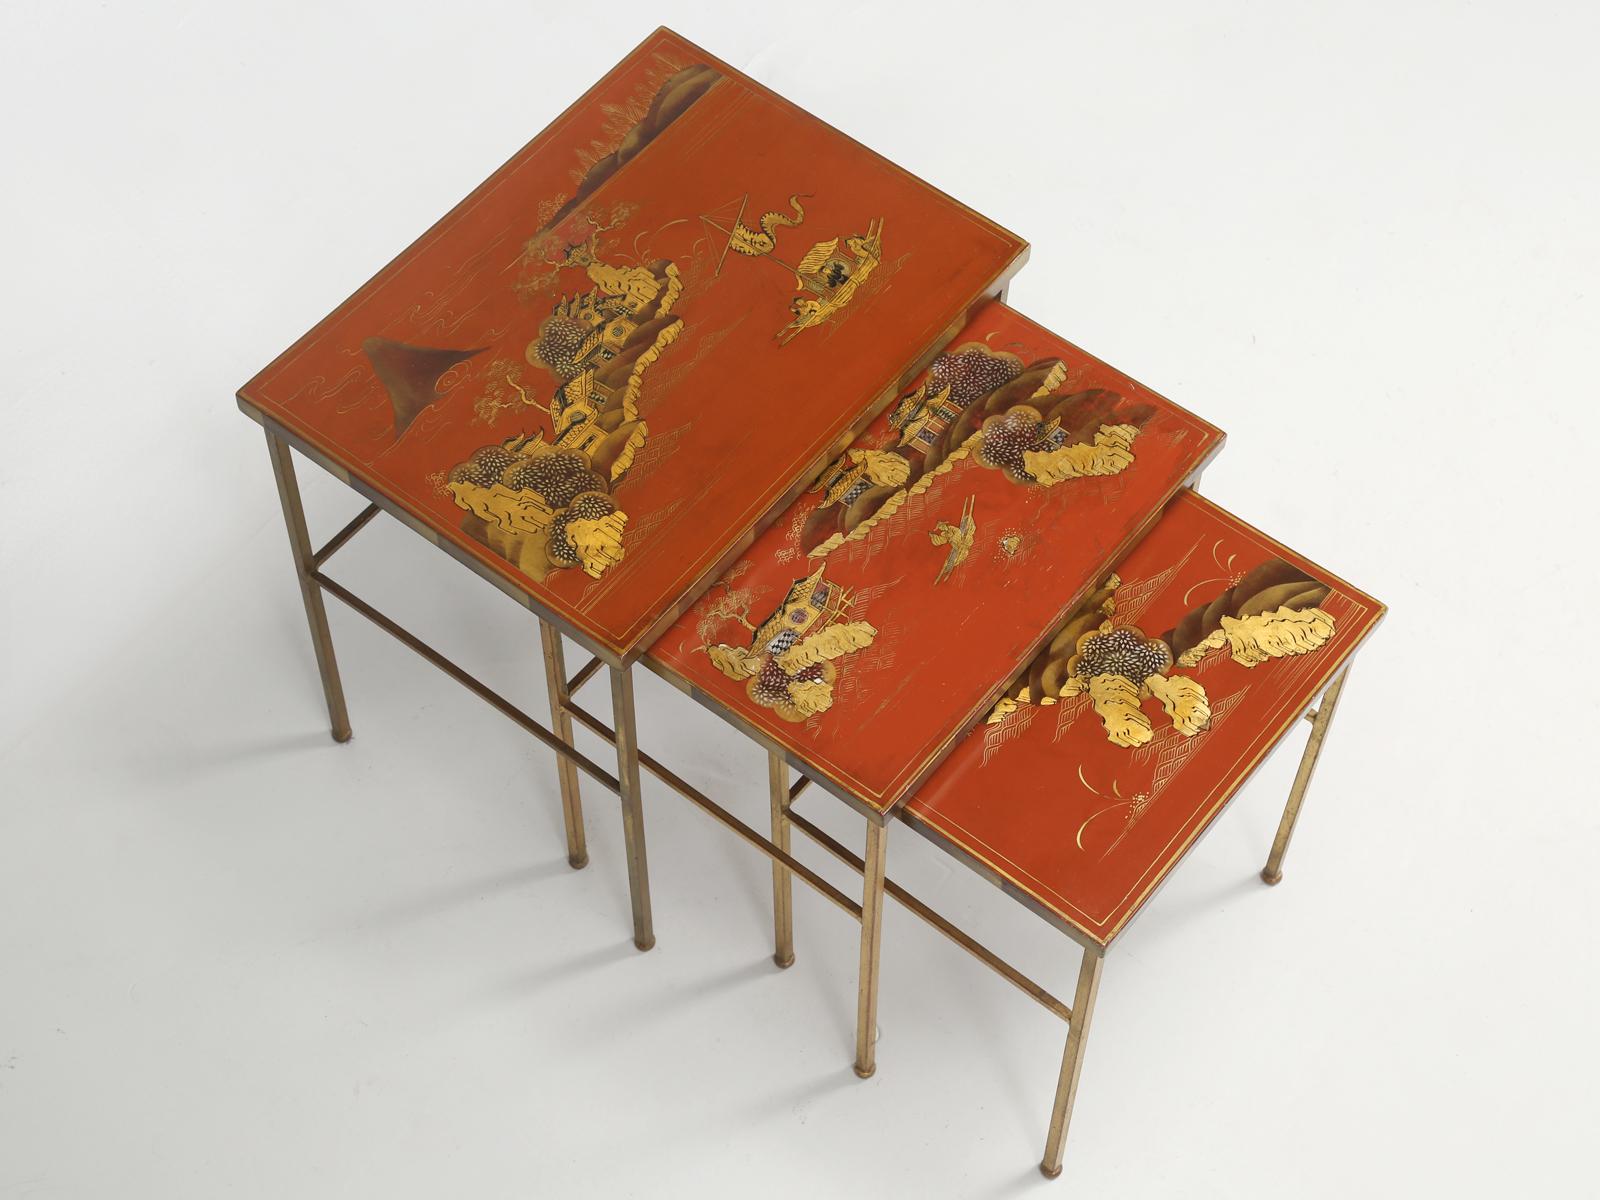 Maison Jansen (attributed to by French expert) set of three nesting tables with red and gilt lacquered tops. The decoration or paintings are of landscapes in China. Please note that the red is slightly different on each of the stacking tables, which